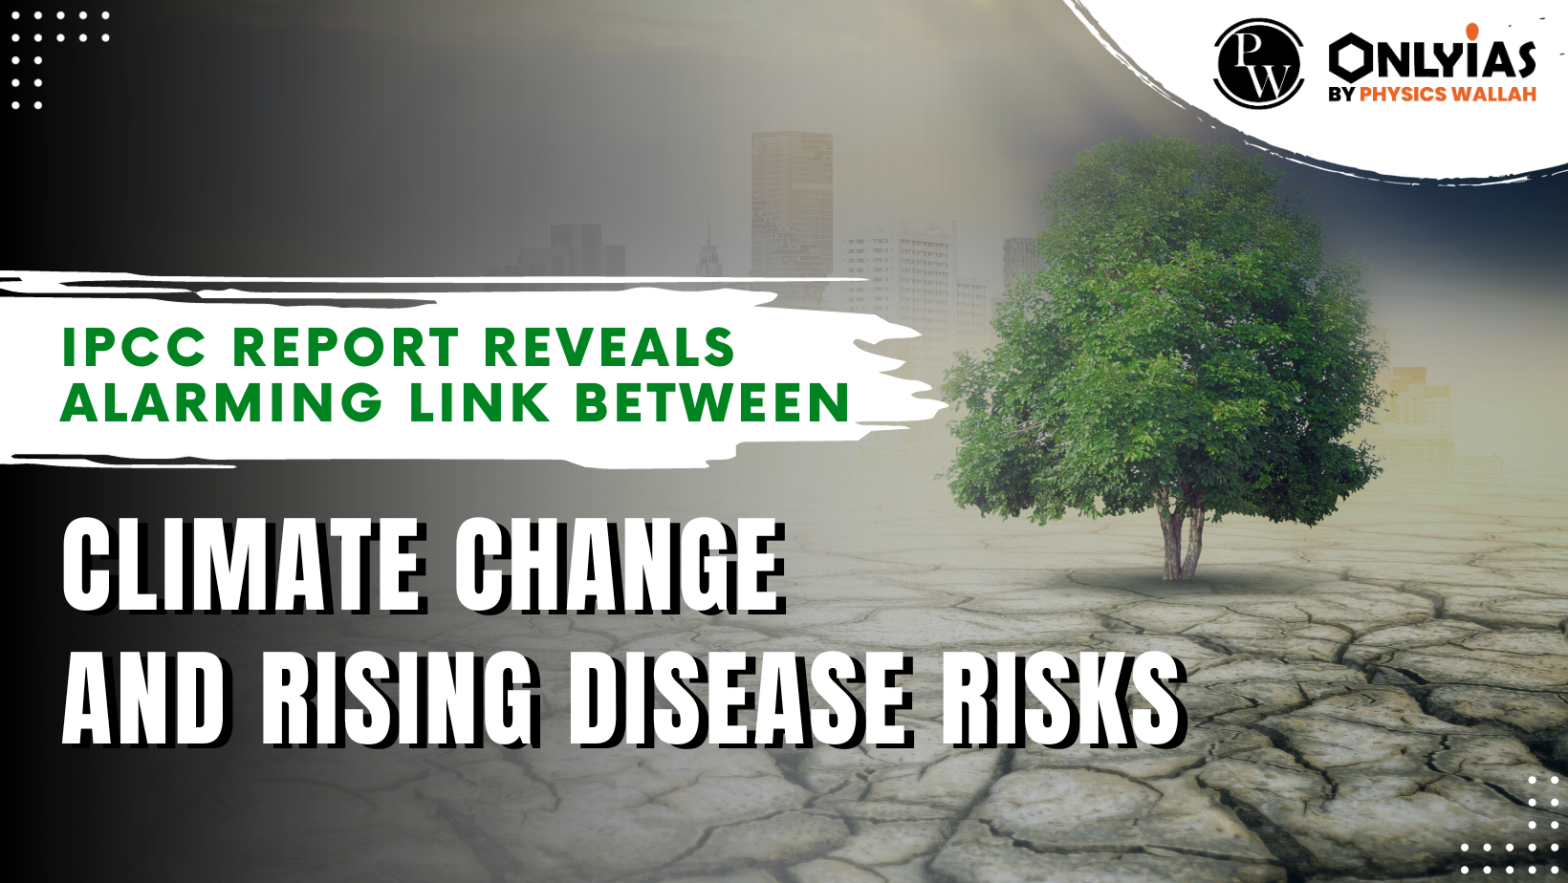 IPCC Report Reveals Link Between Climate Change and Disease Risks | PWOnlyIAS 2023